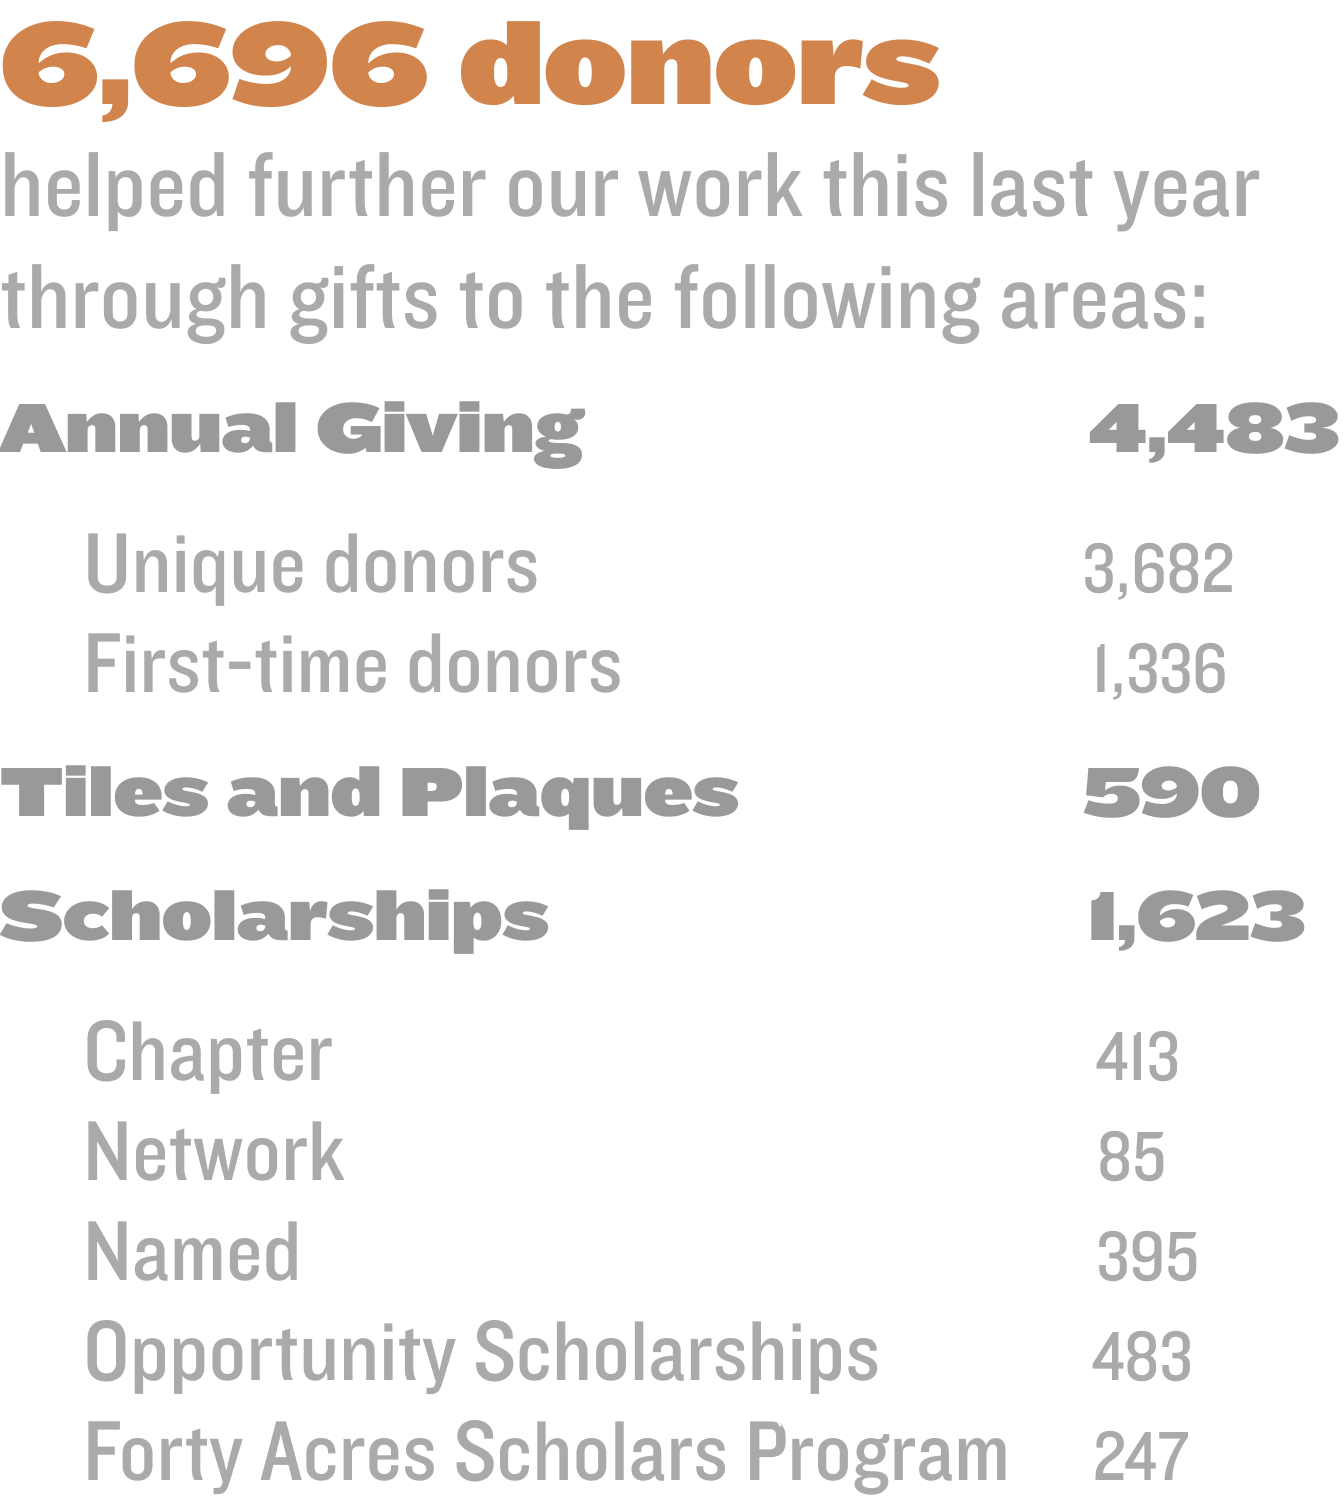 6,696 donors helped further our work this last year through gifts to the following areas: Annual Giving                       4,483      Unique donors                                  3,682       First-time donors                             1,336  Tiles and Plaques                   590  Scholarships                               1,623        Chapter                                              413       Network                                              85       Named                                    